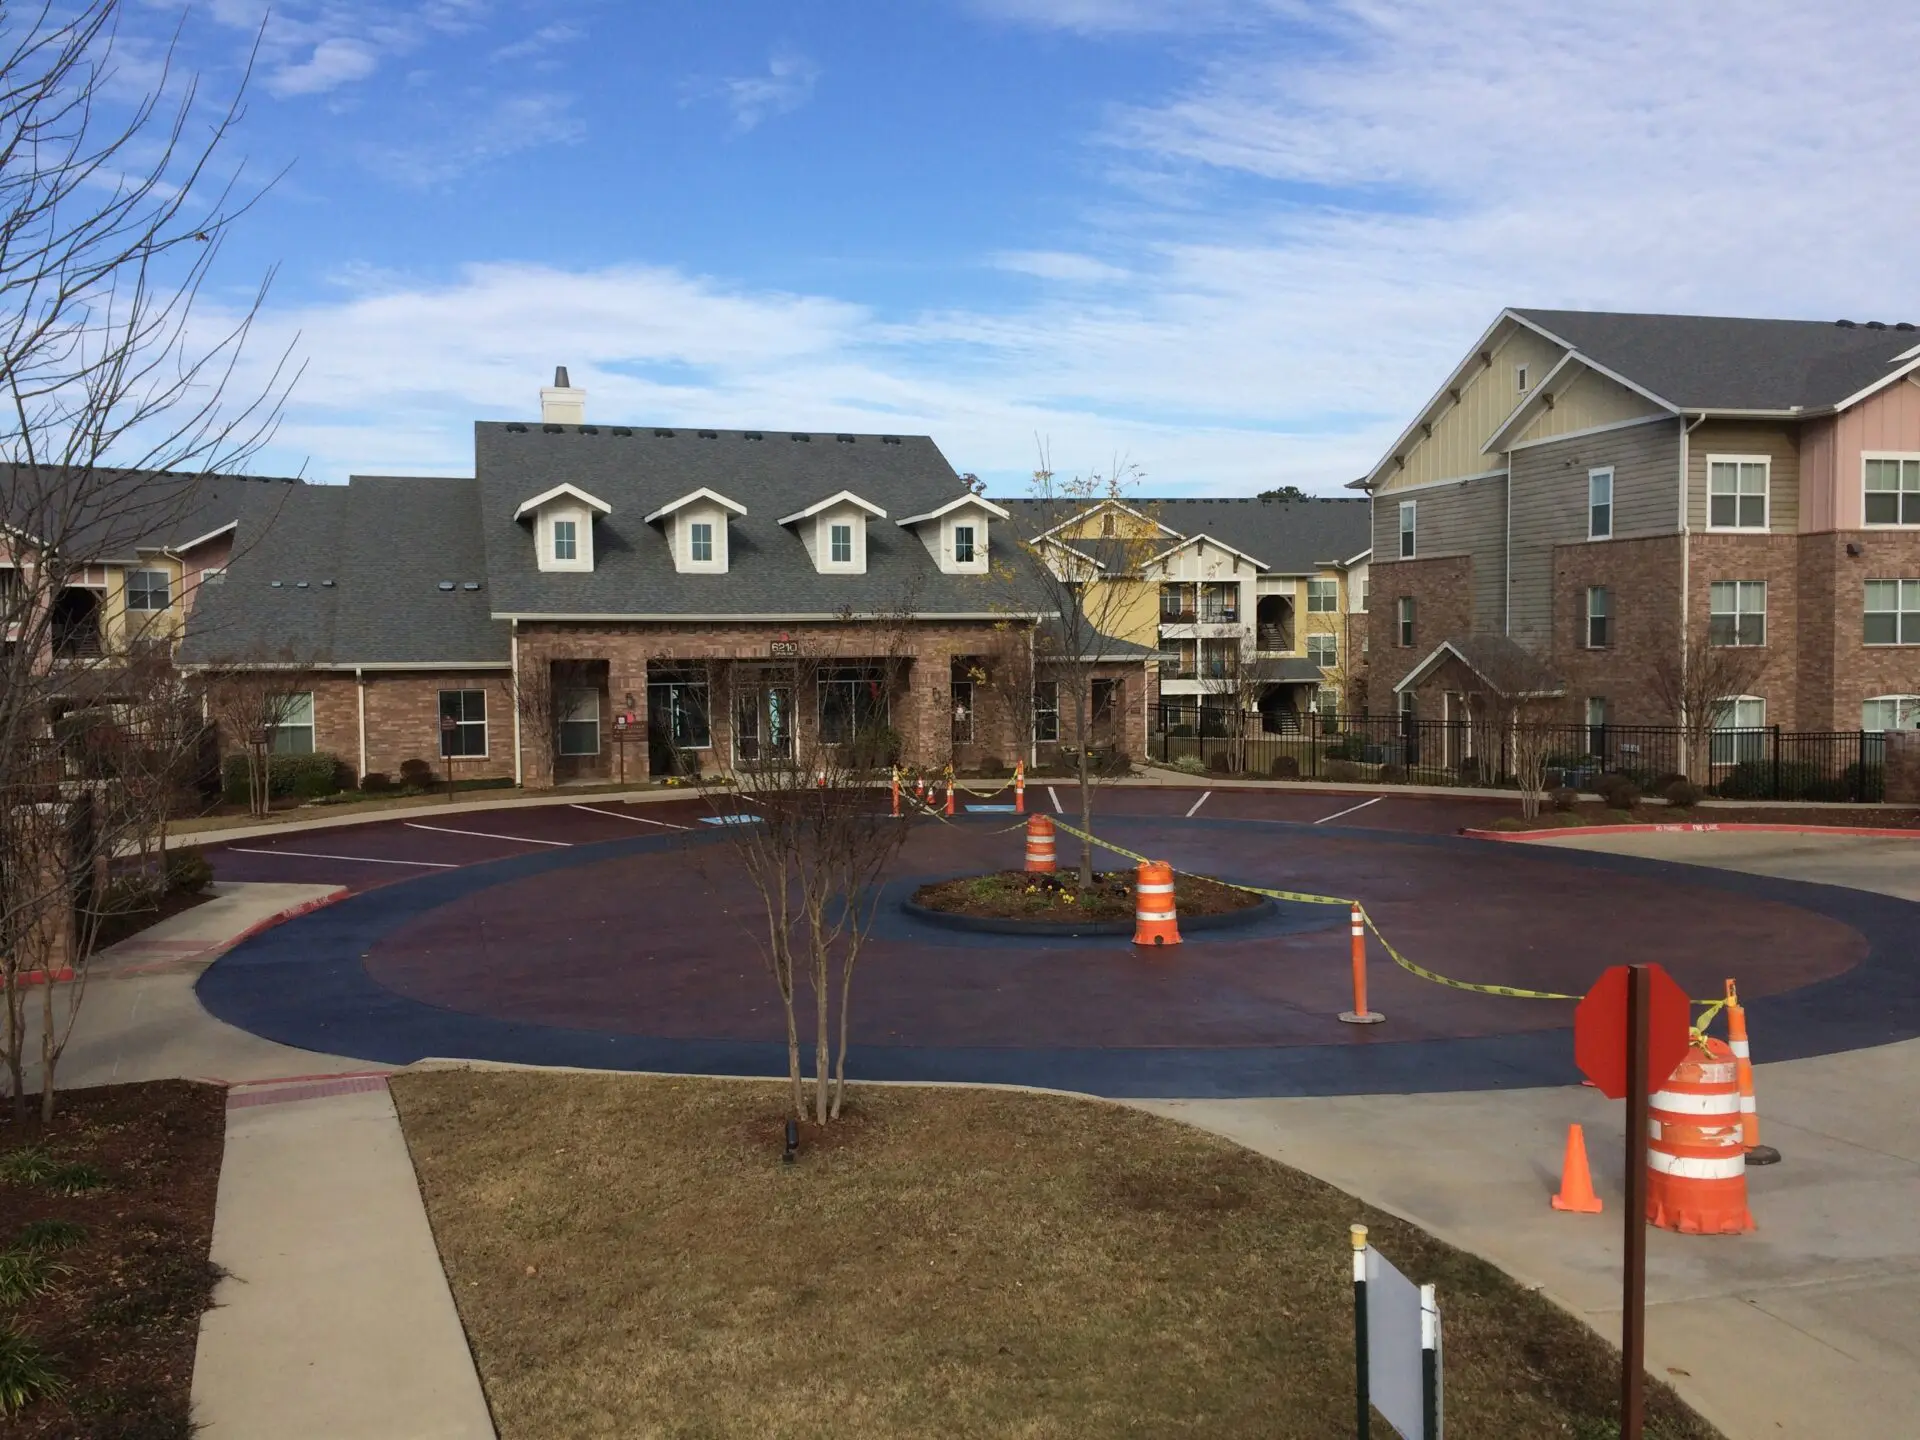 A view of an apartment complex with orange cones.